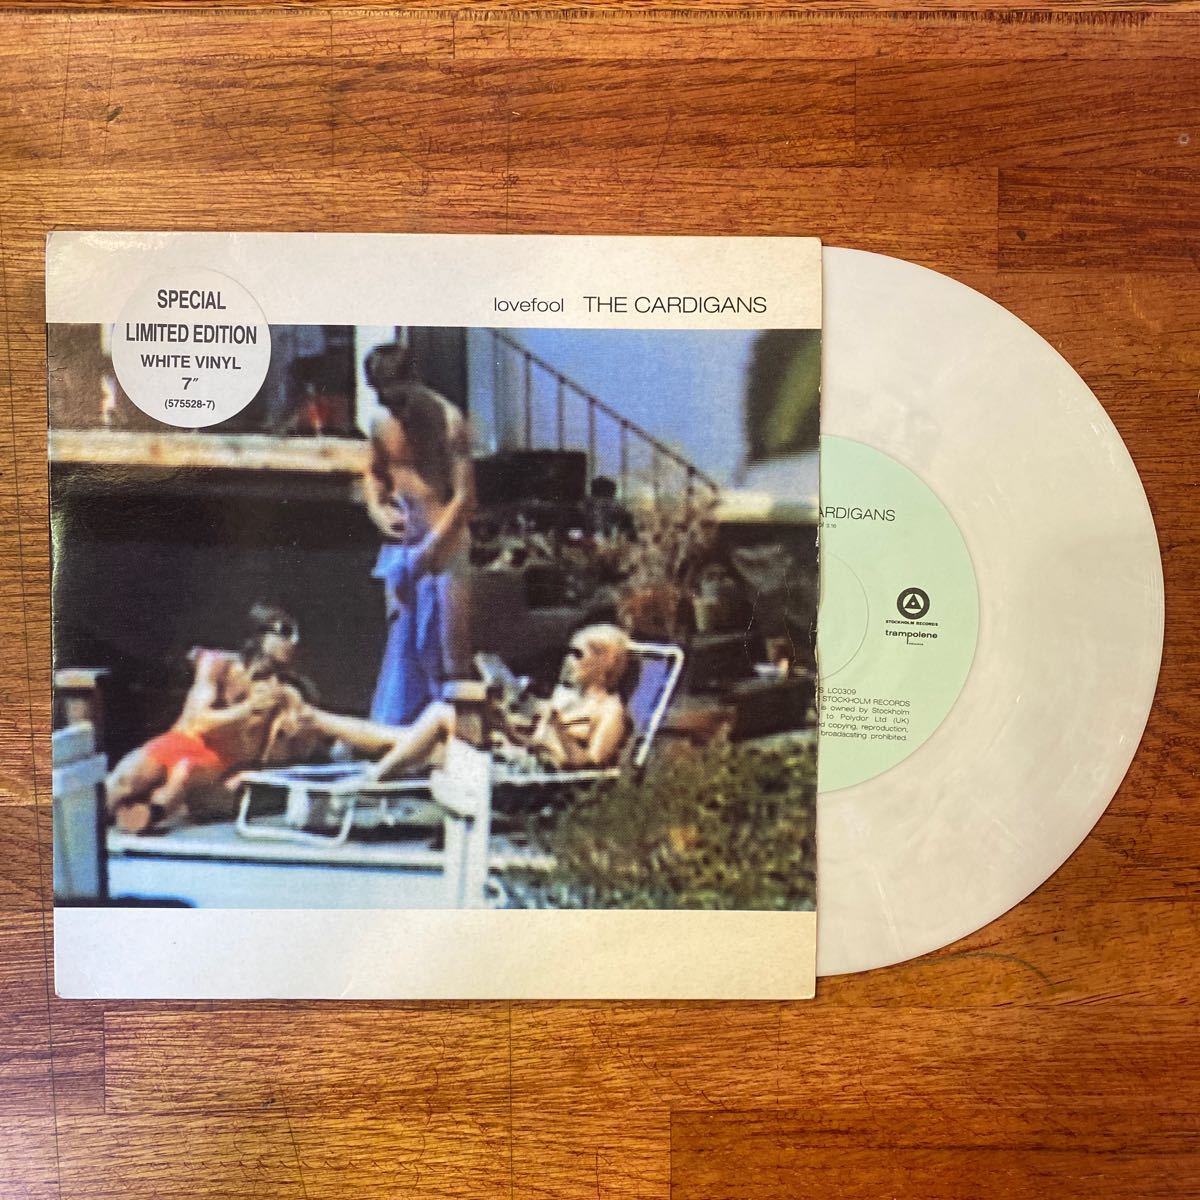 EP-003 Cardigans Cardigans LoveFool / Nasty Sunny Beam / White Vinyl Limited Edition 7 1996 Stockholm Records